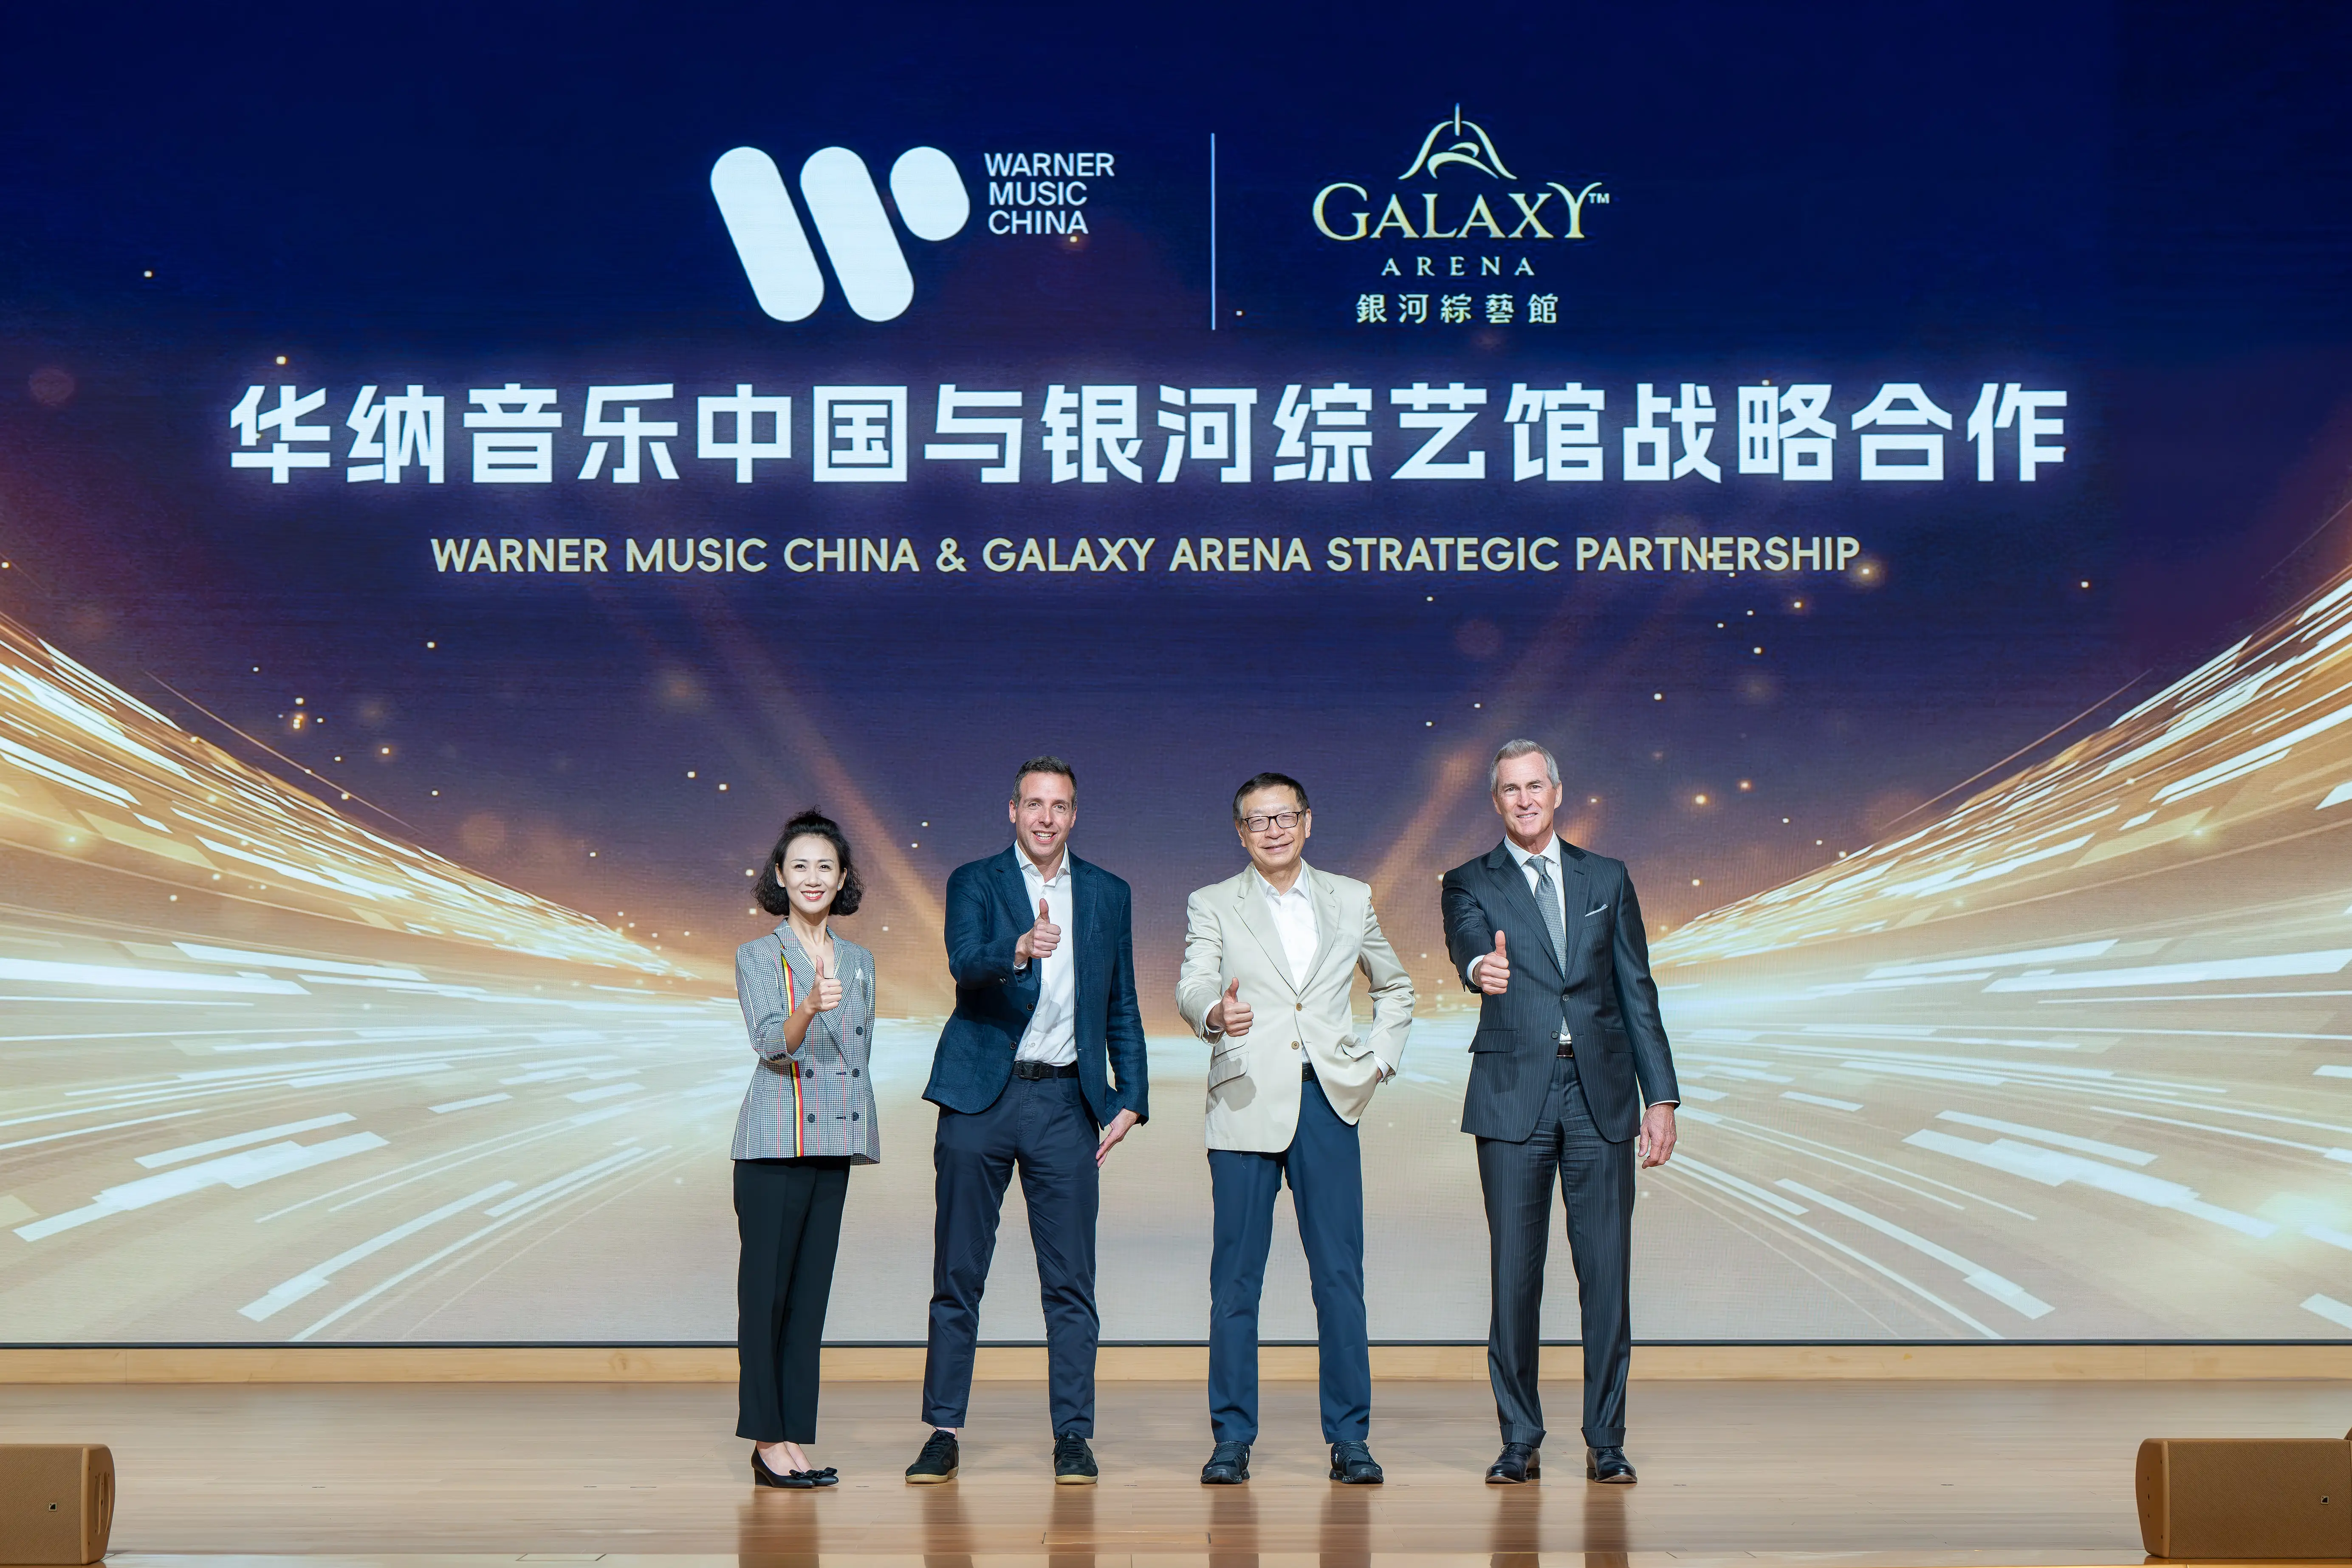 HeroPhoto_GALAXY ARENA JOINS FORCES WITH WARNER MUSIC CHINA IN NEW STRATEGIC PARTNERSHIP.